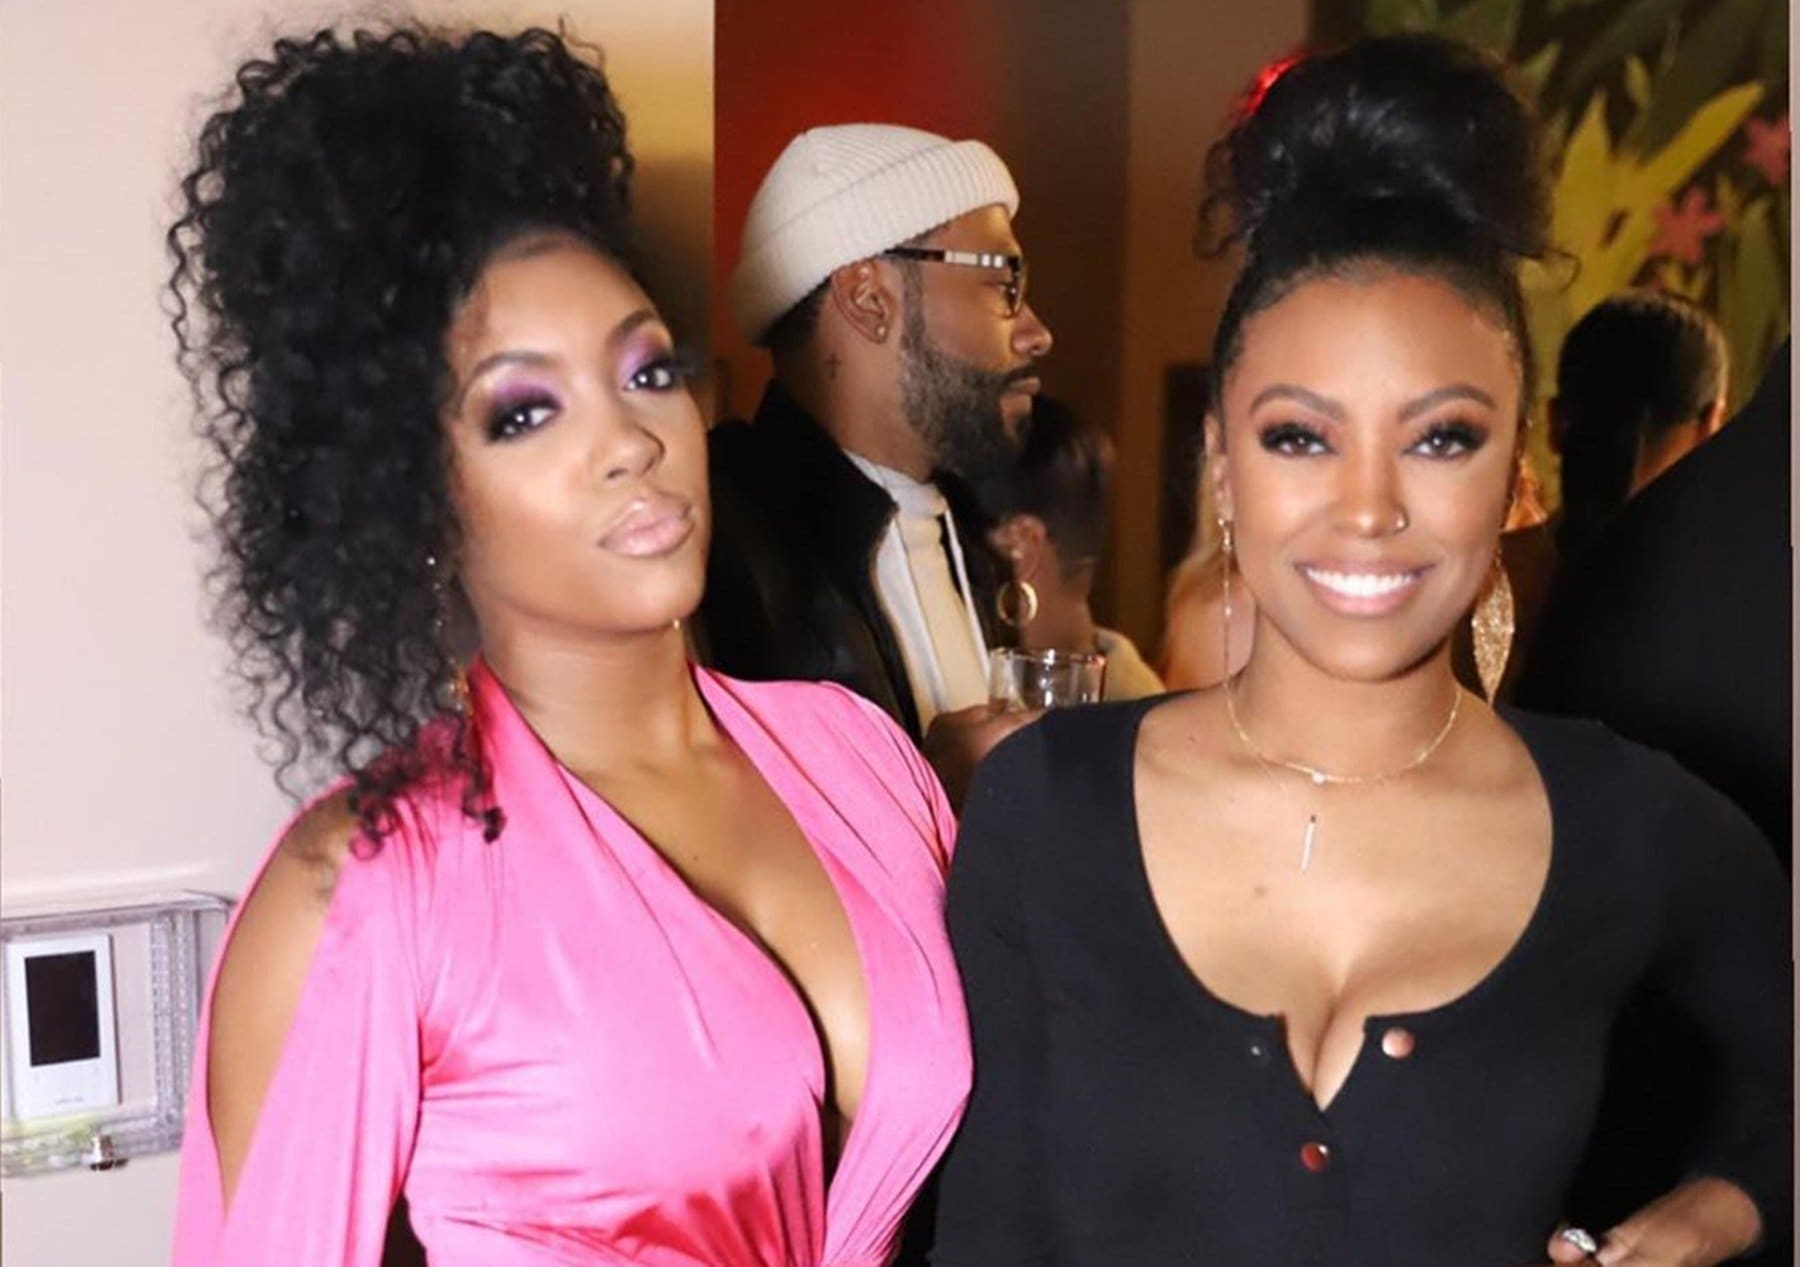 Porsha Williams Has The Best Time With Her Sister, Lauren Williams - See Them Dancing For The Camera